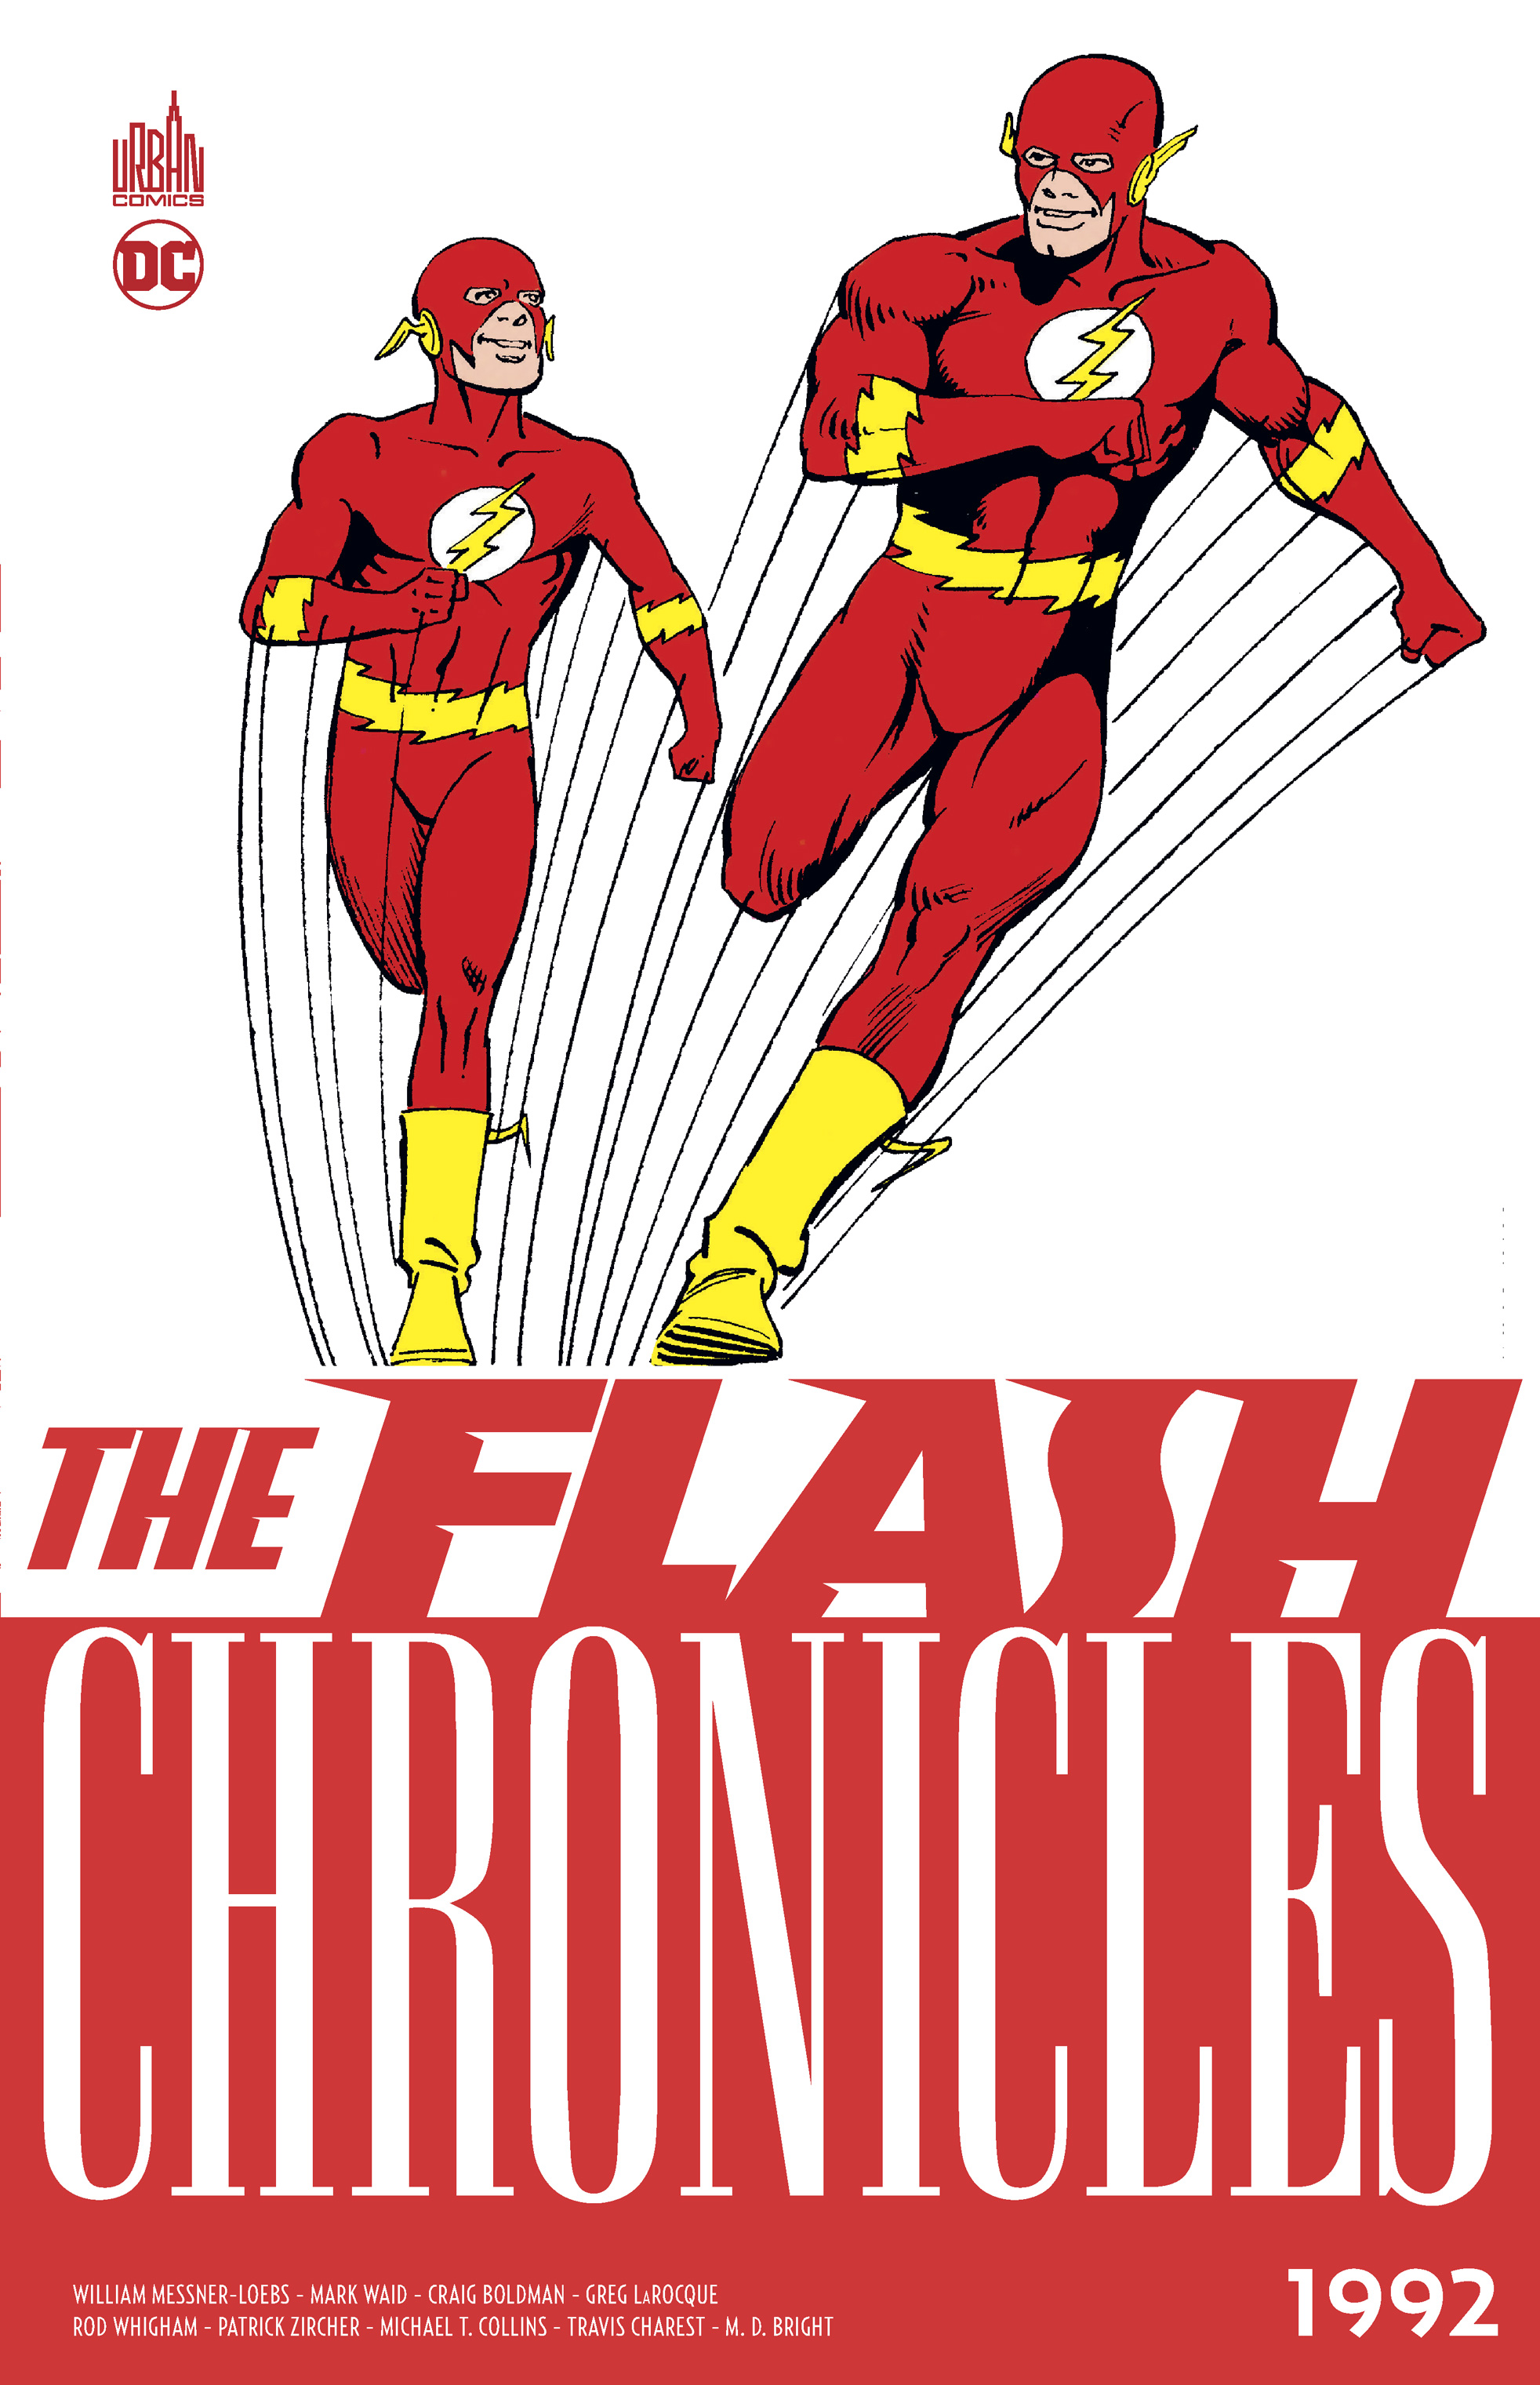 The Flash Chronicles 1992 - couv